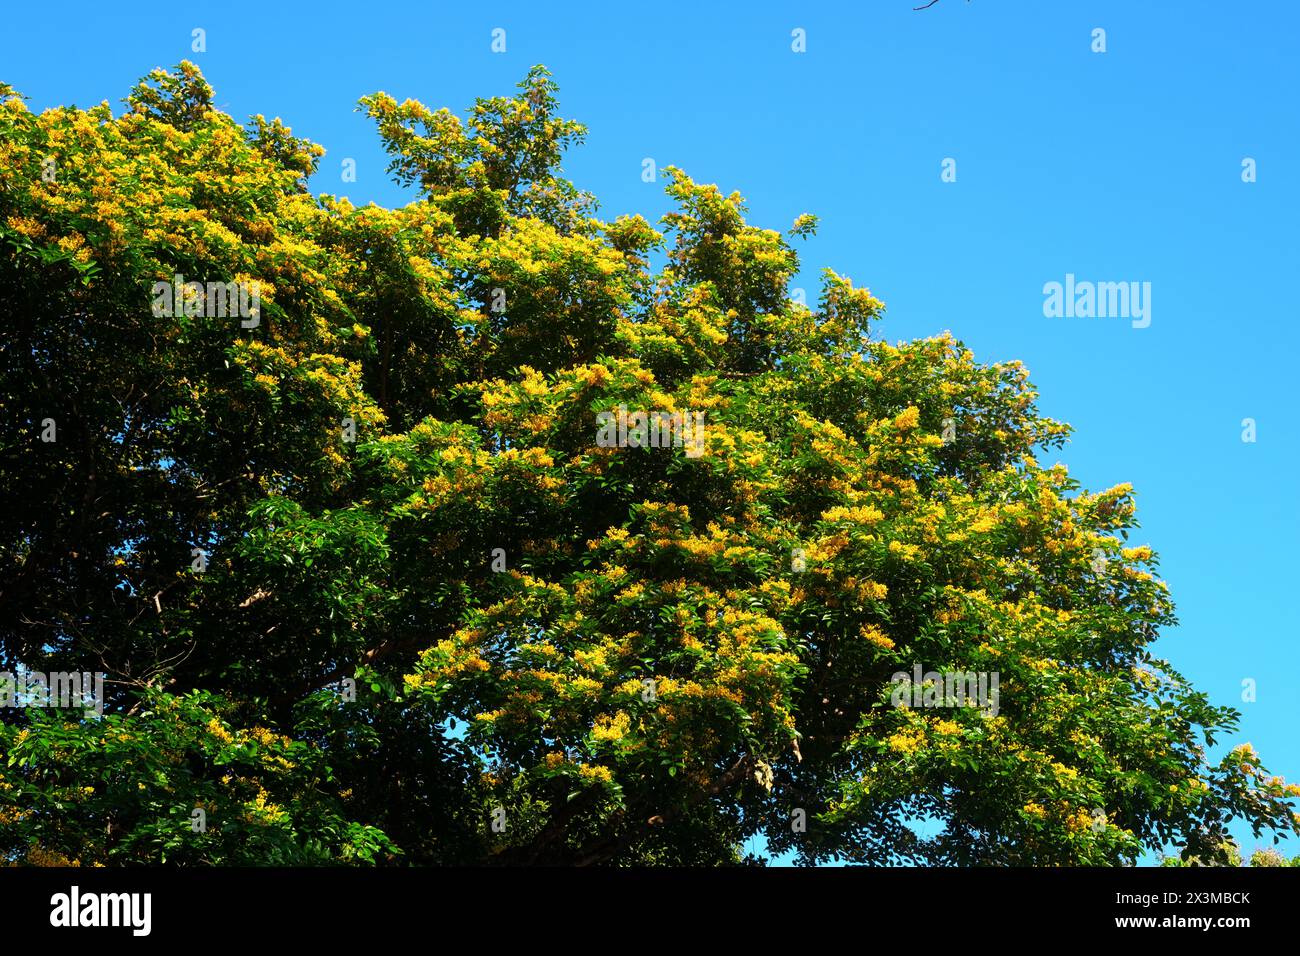 Flowering narra tree or Pterocarpus indicus tropical tree in Philippines. Stock Photo